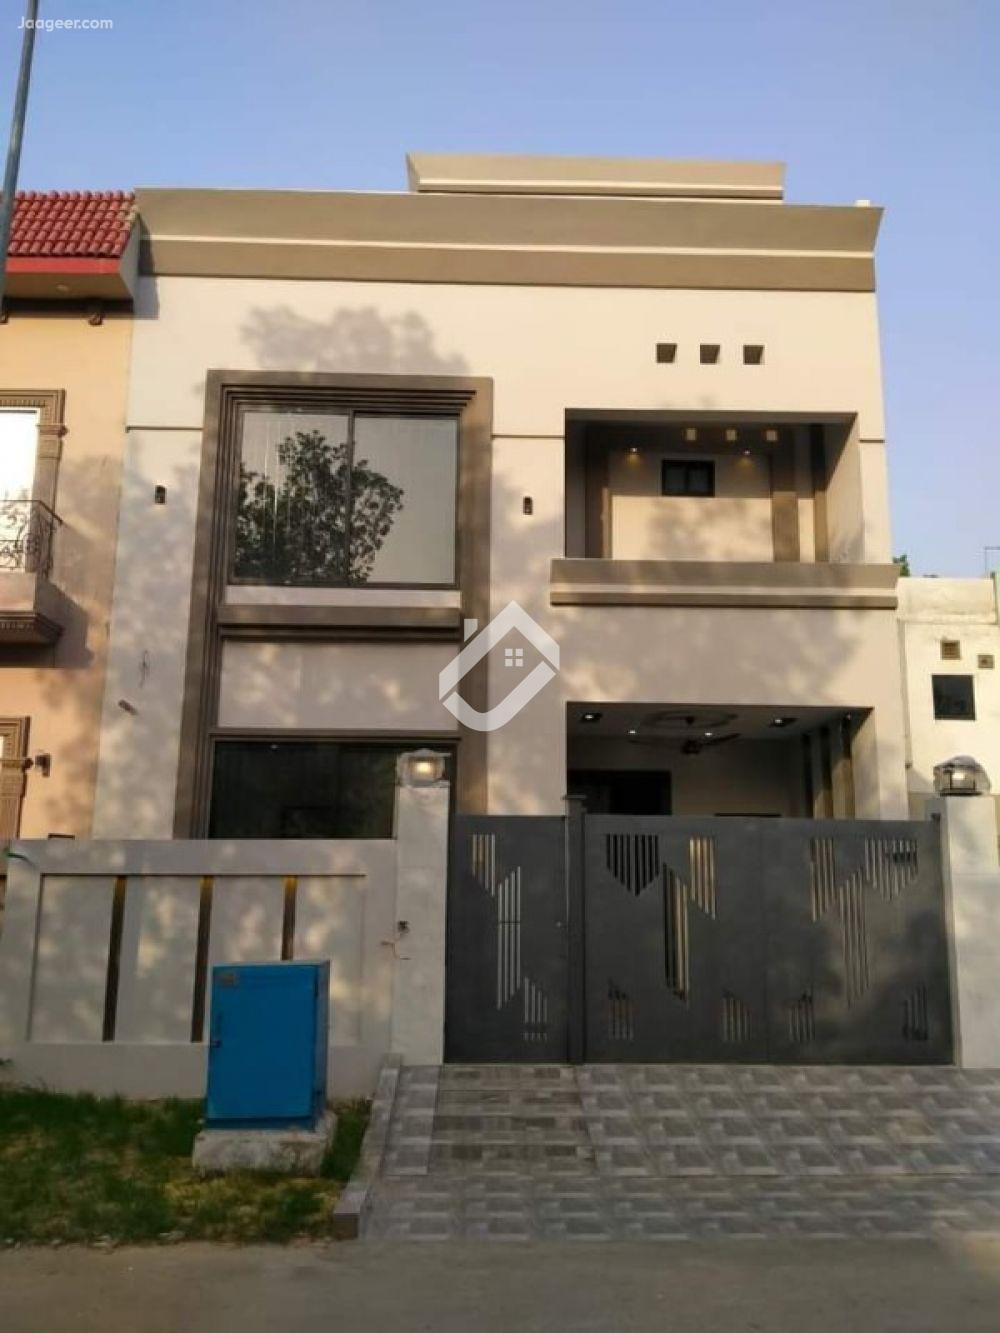 View  5 Marla Double Storey House For Sale In Citi Housing Scheme  in Citi Housing Phase 1, Gujranwala